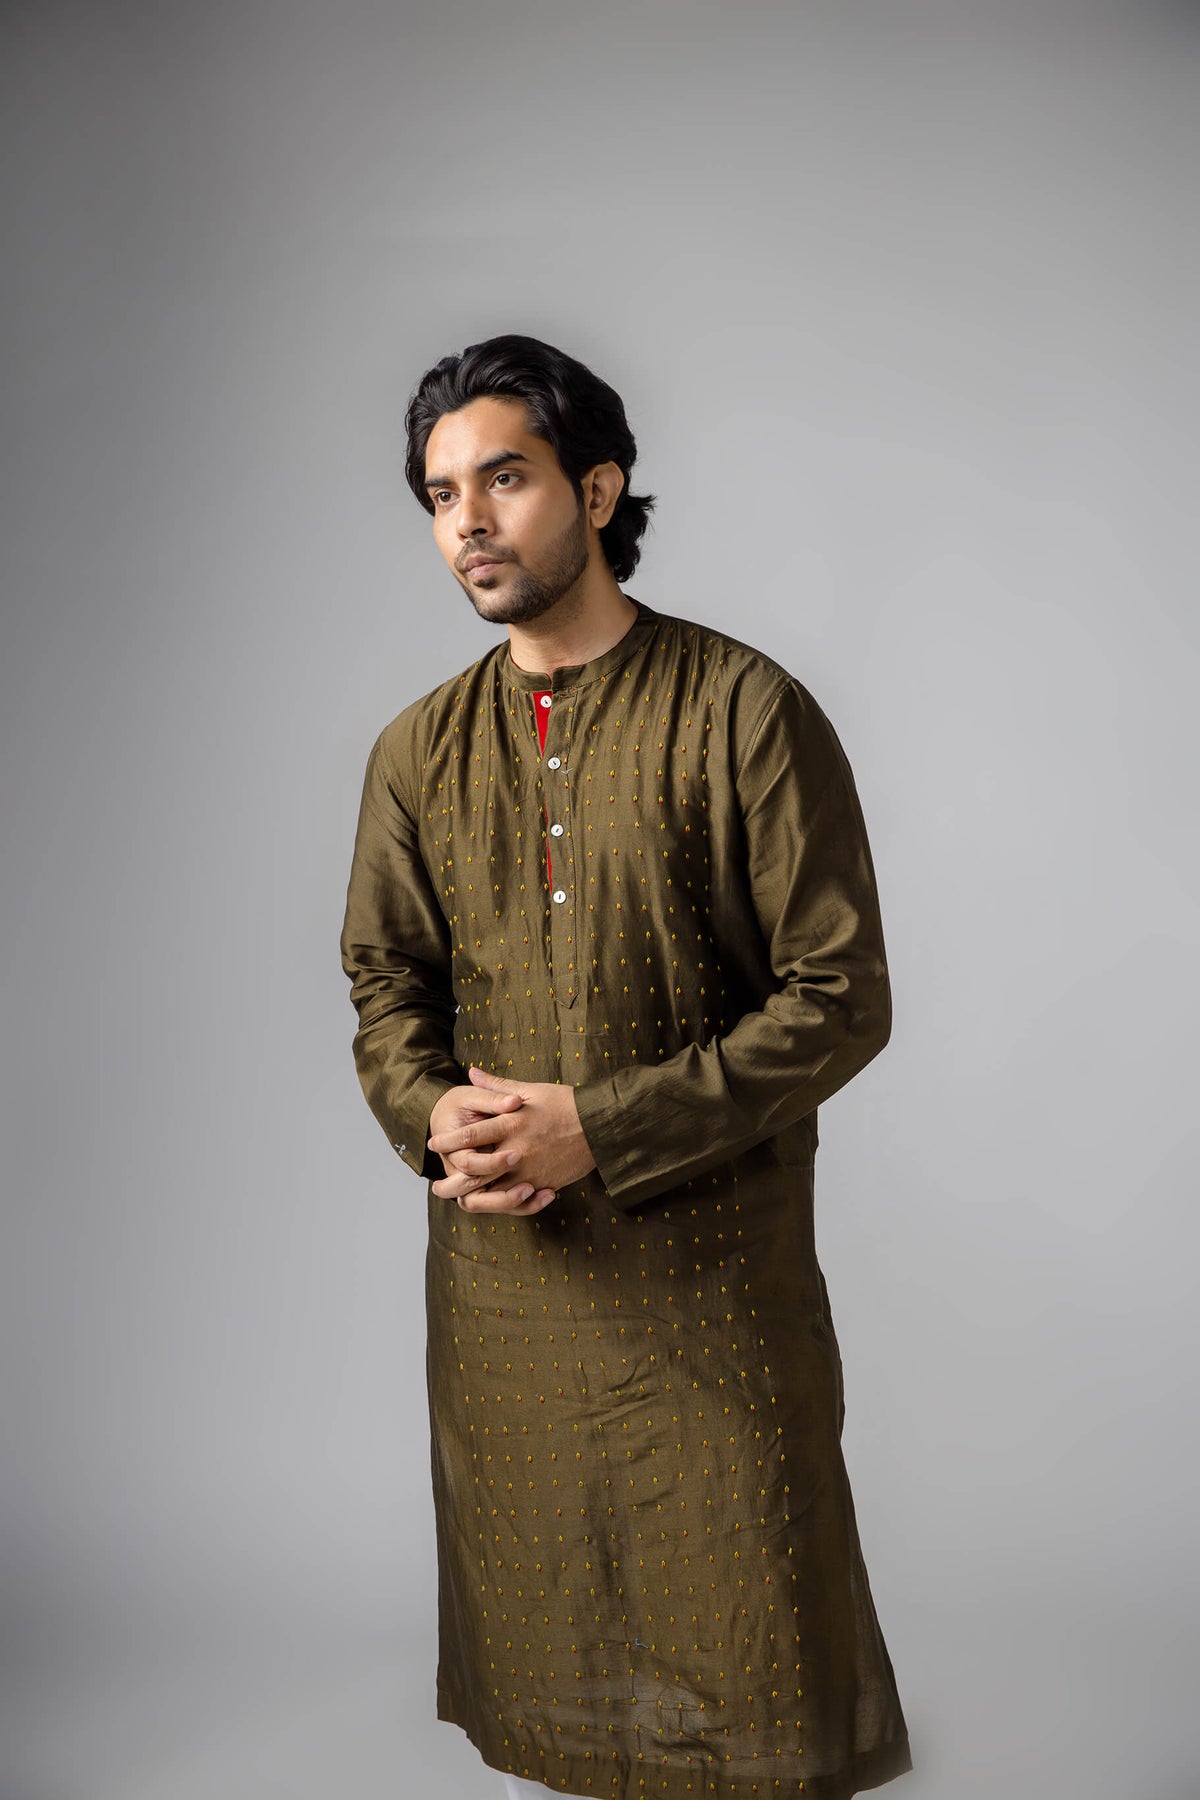 Embroidered Olive Green Kurta in cotsilk for men